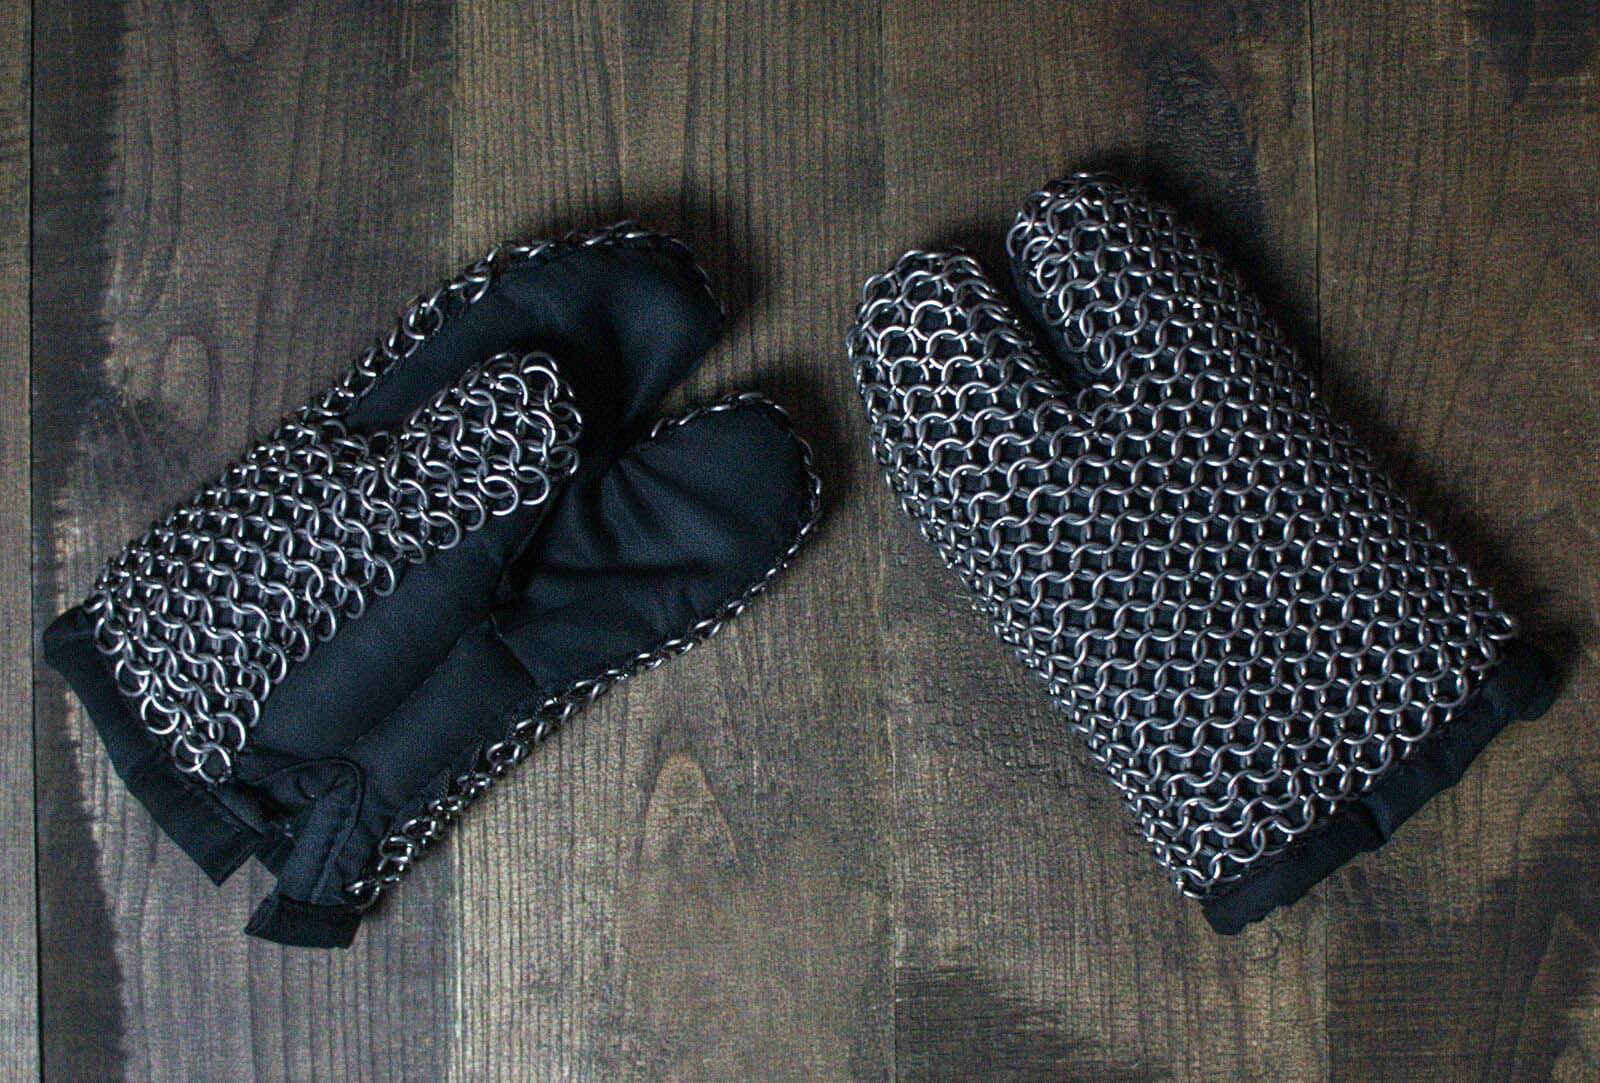 https://steel-mastery.com/image/cache/1001-2000/1134/additional/01b5-Padded_gauntlets_with_full_chain_mail_protection1-0-1.jpg